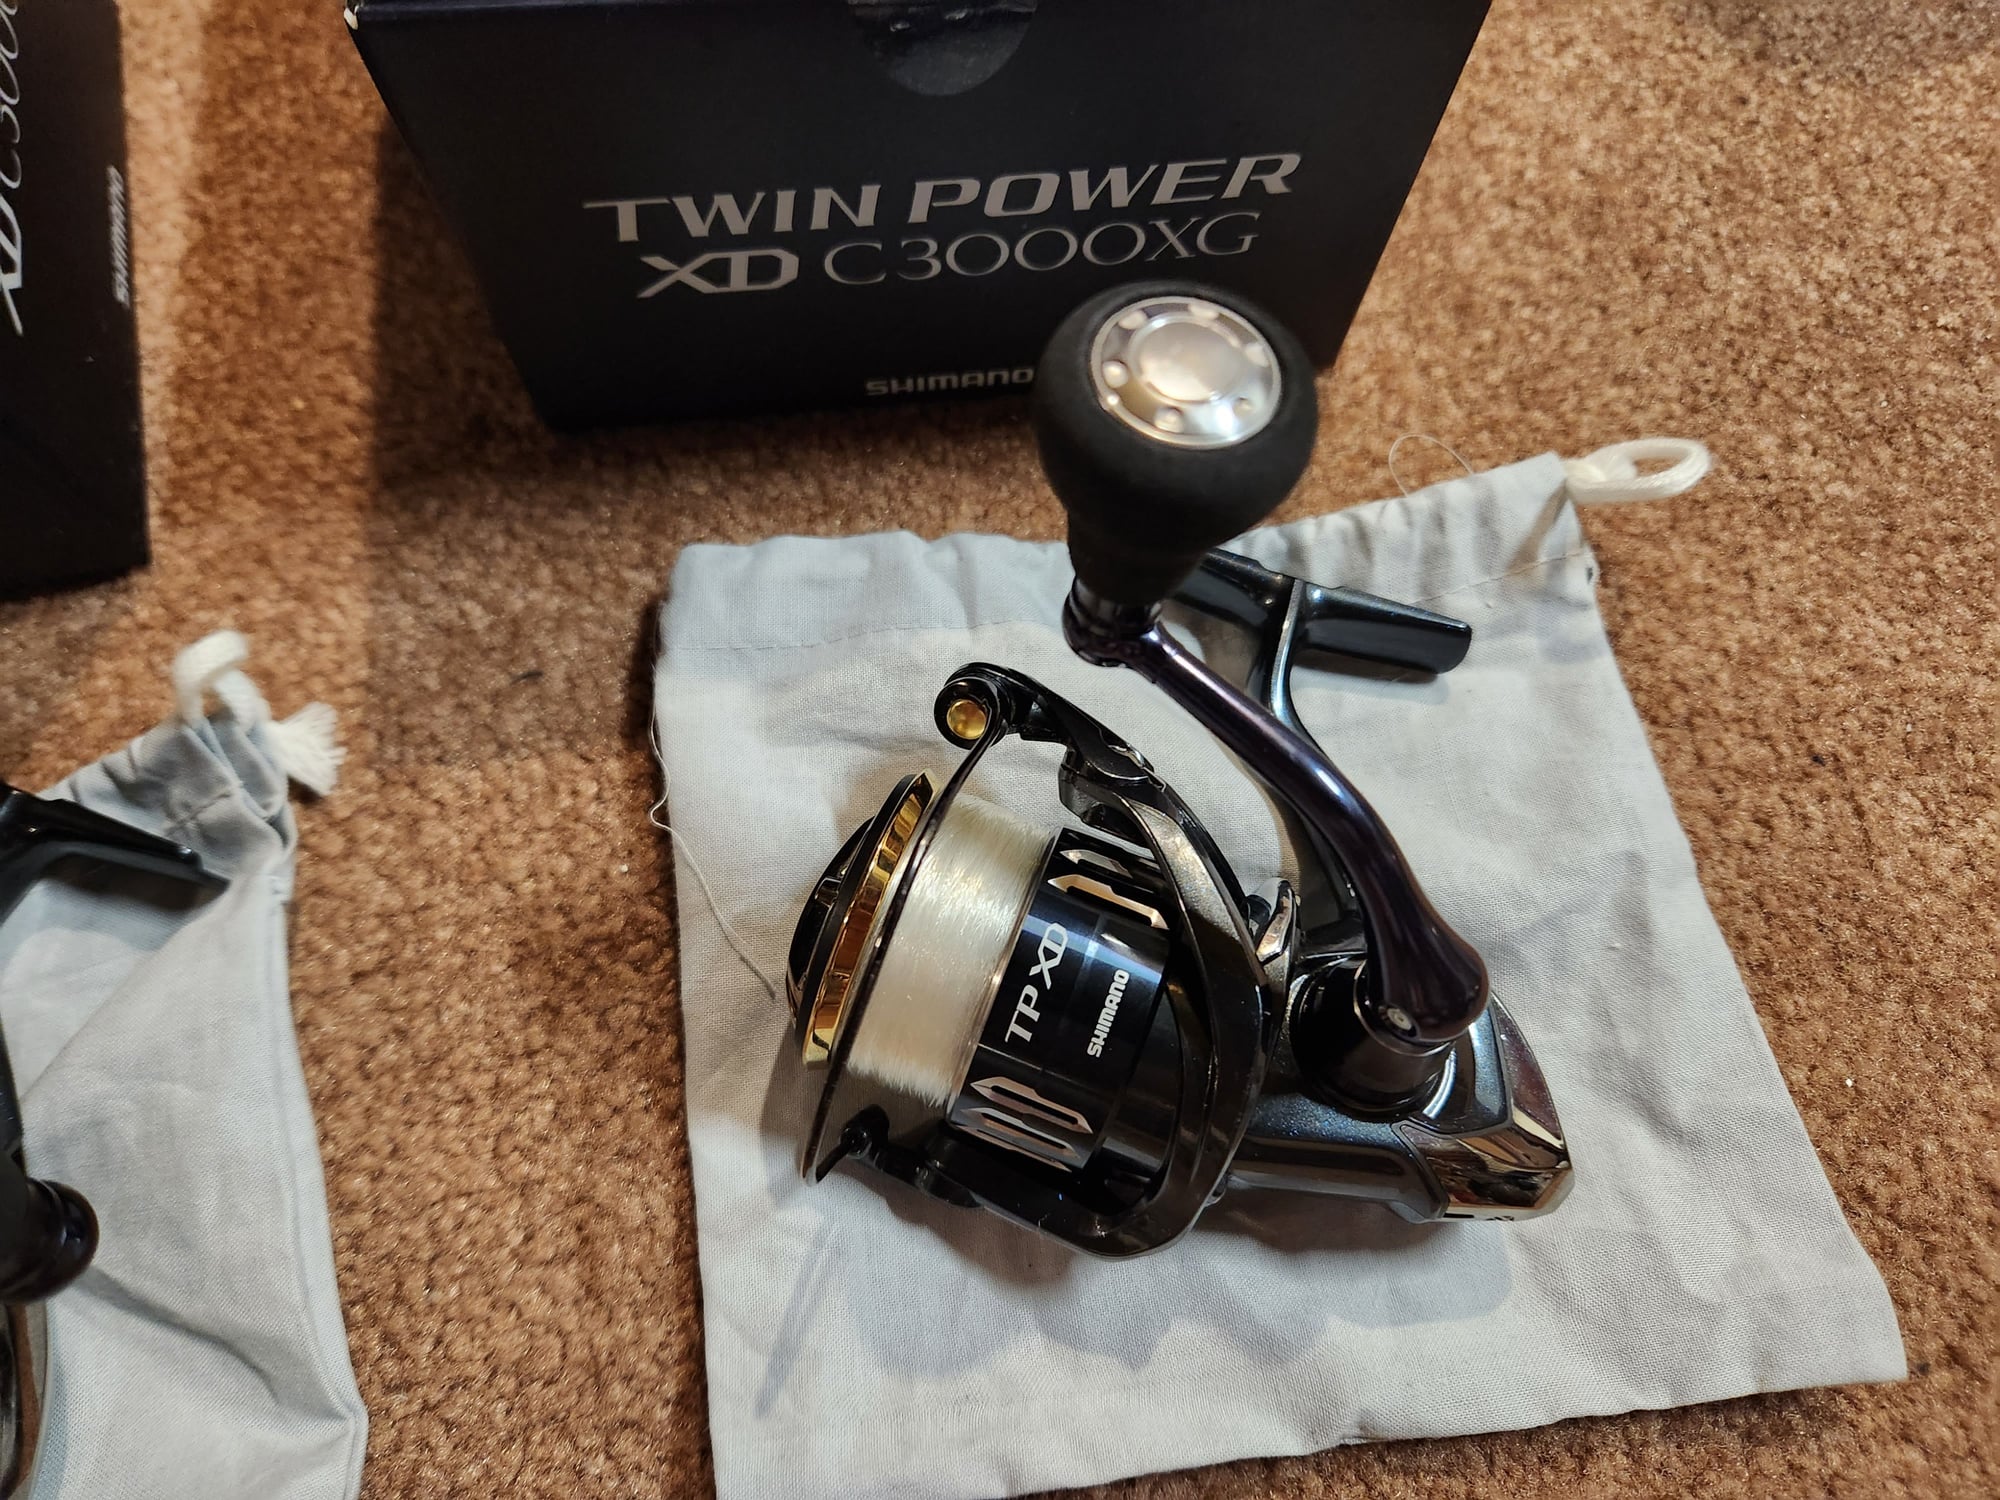 Shimano, Accurate reels, g loomis and Phenix rods - The Hull Truth